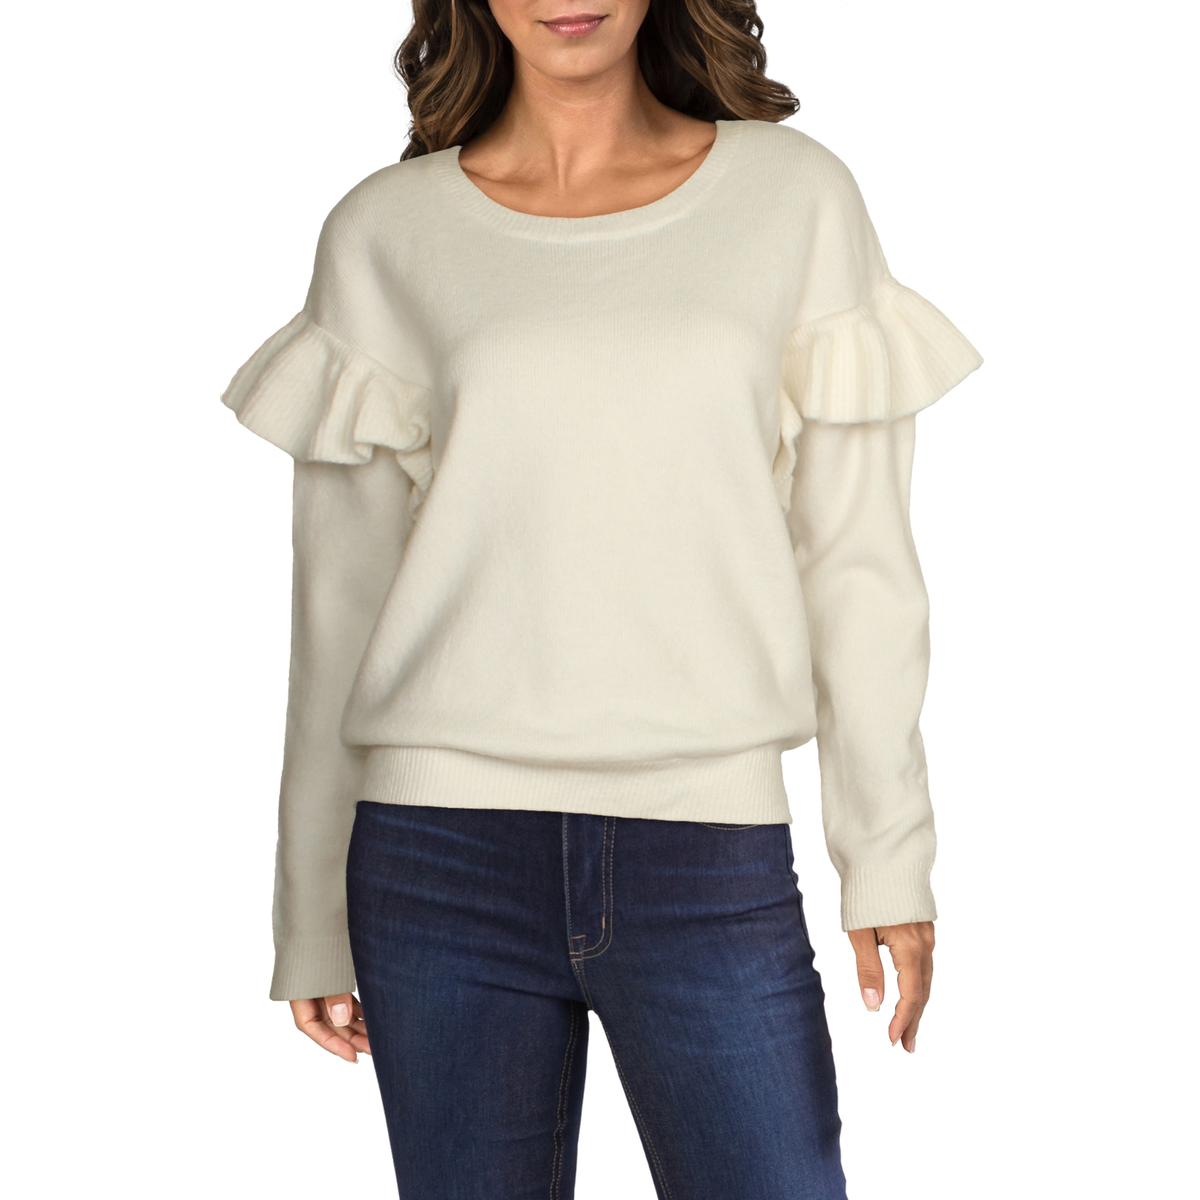 INC Womens Perforated Pullover Shirt Crewneck Sweater Top BHFO 0020